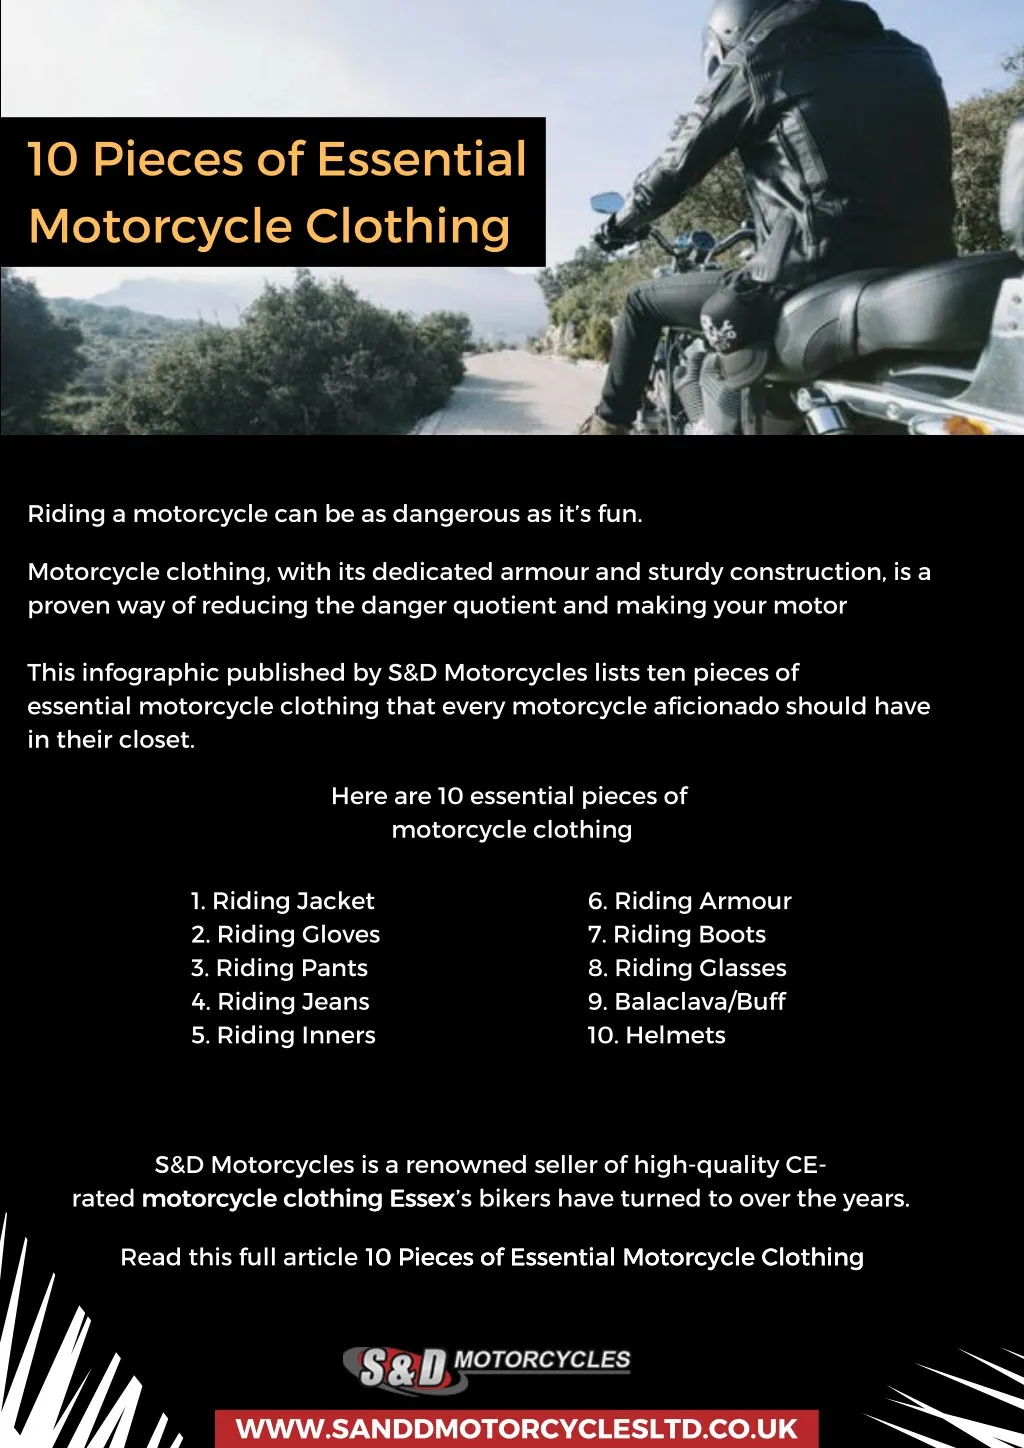 10 pieces of essential motorcycle clothing